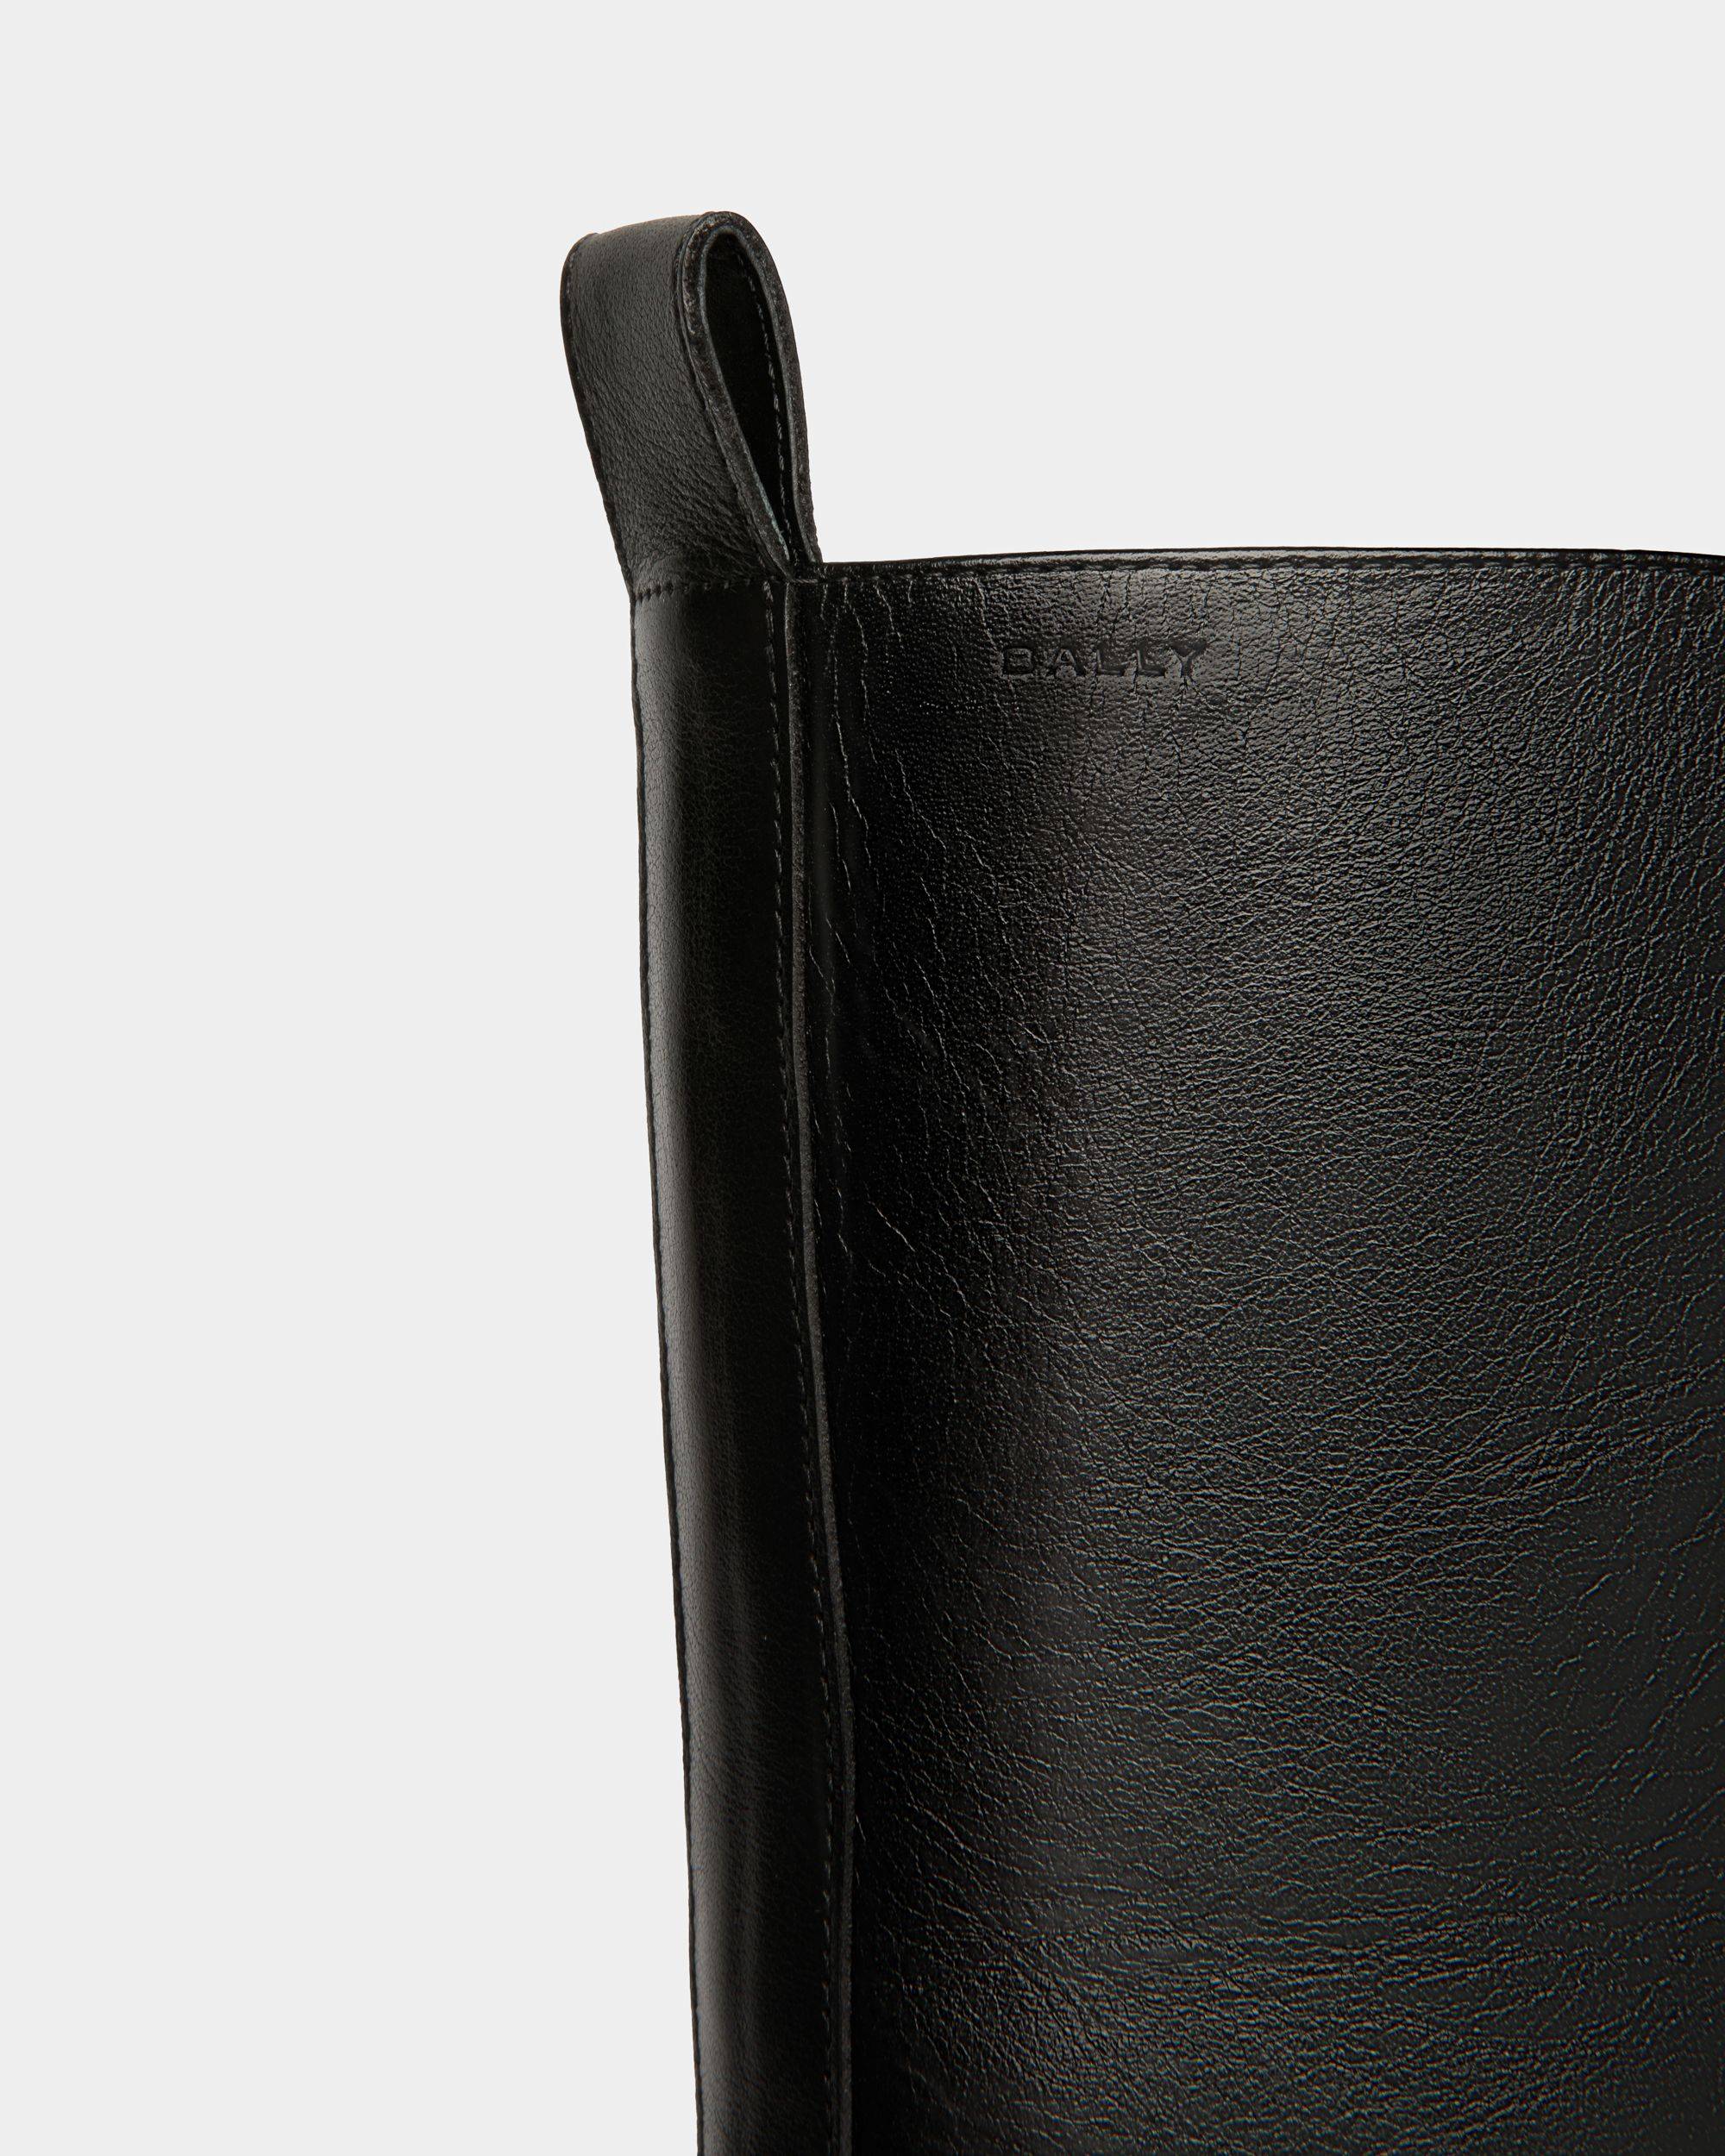 Peggy | Men's Boot in Black Leather | Bally | Still Life Detail